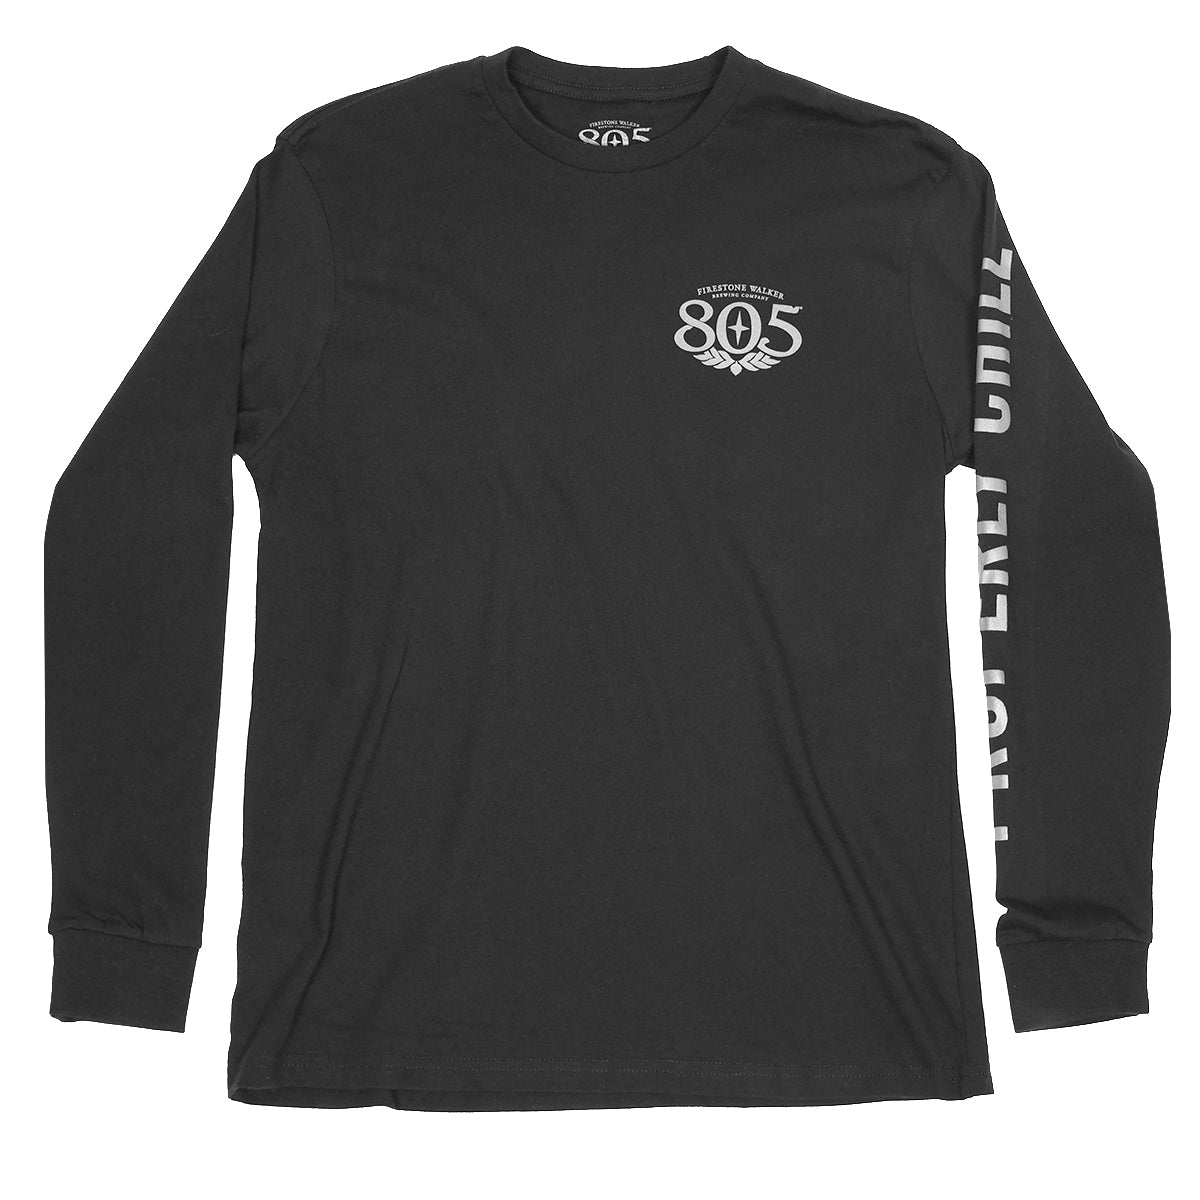 805 Premier Properly Chill Long Sleeve Tee